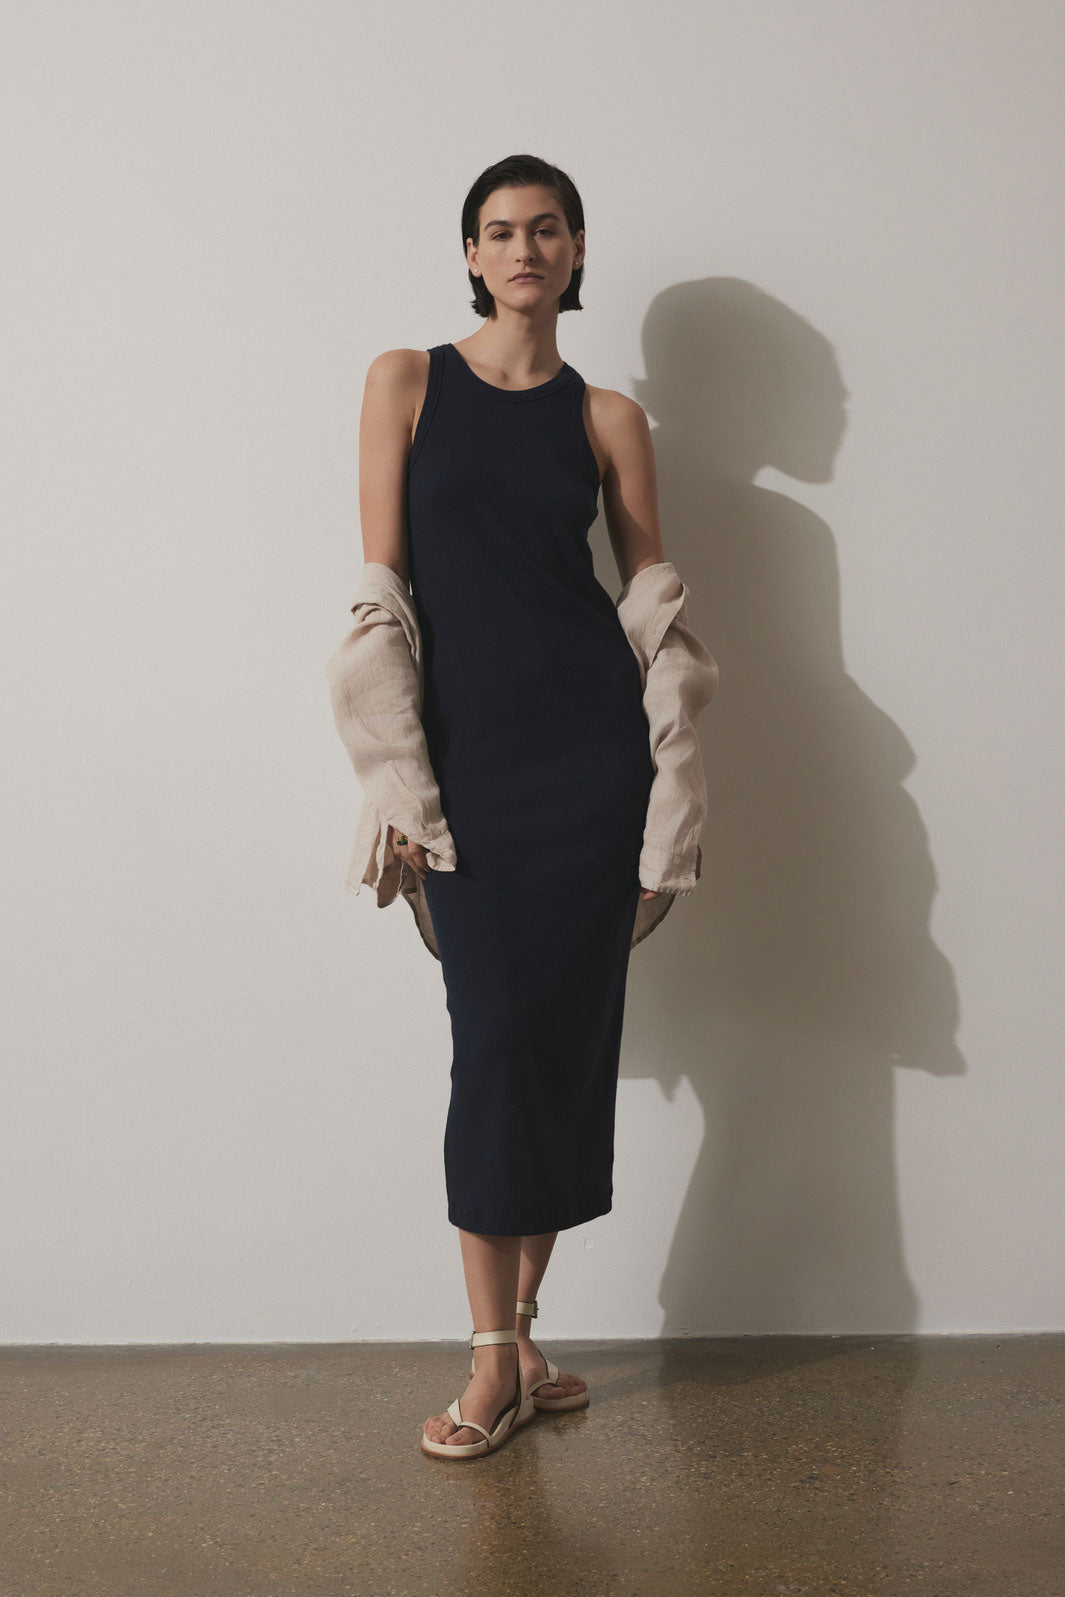   A woman in a GRIFFITH DRESS by Velvet by Jenny Graham with a crew neckline stands holding a cream jacket, with her shadow visible on the wall behind her. She wears beige sandals. 